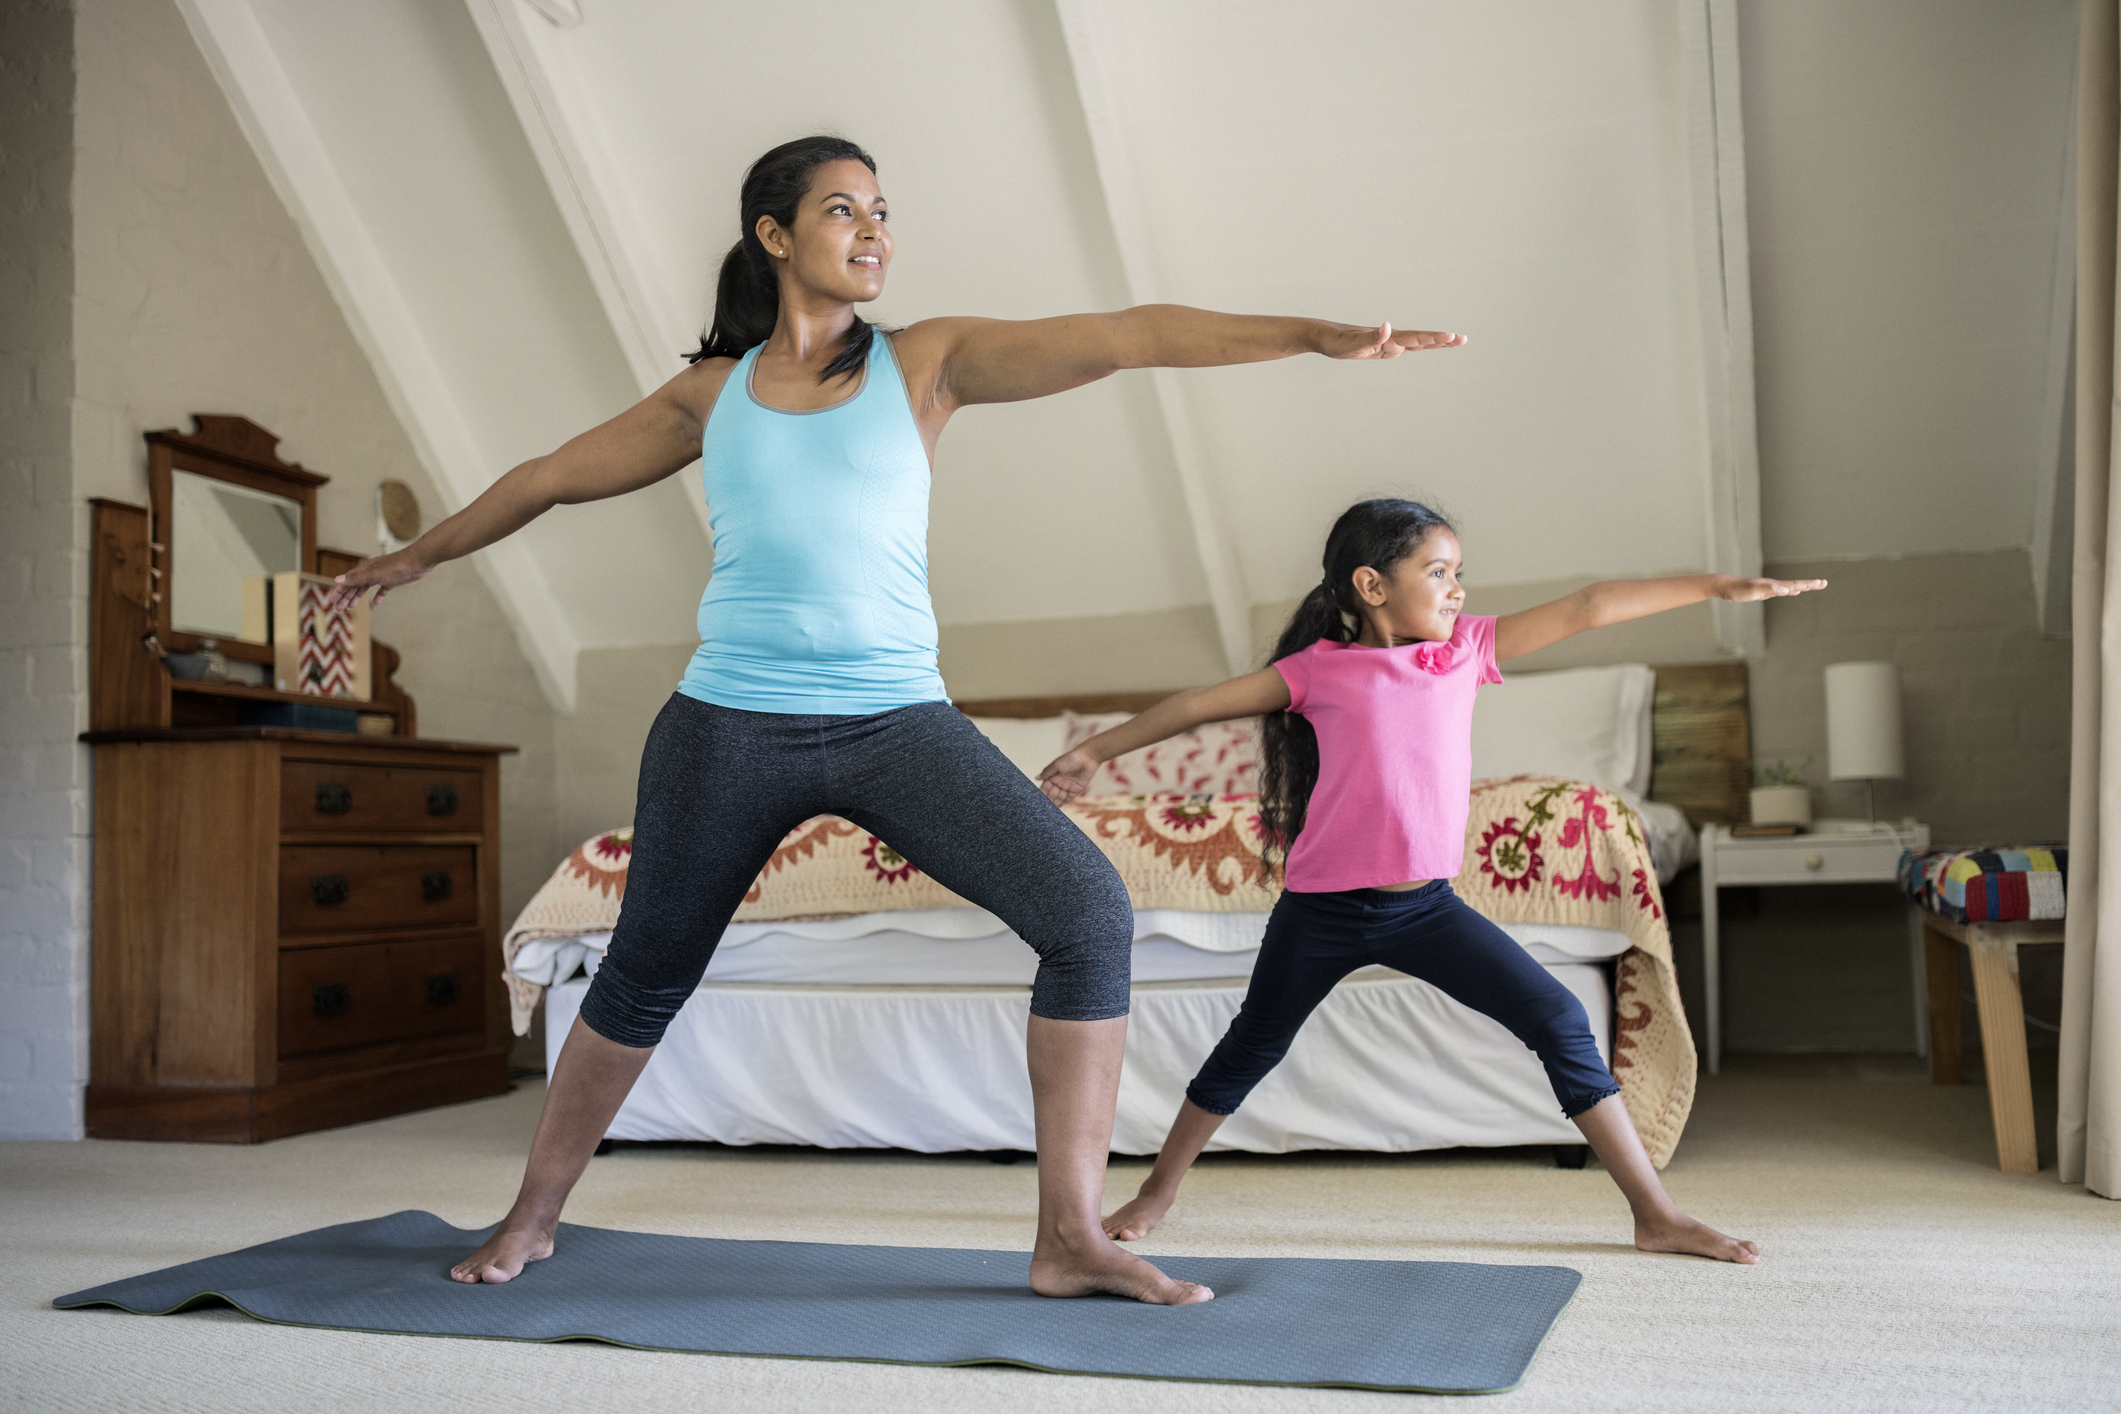 Mother and daughter practicing yoga. Females are exercising in bedroom. They are at home.